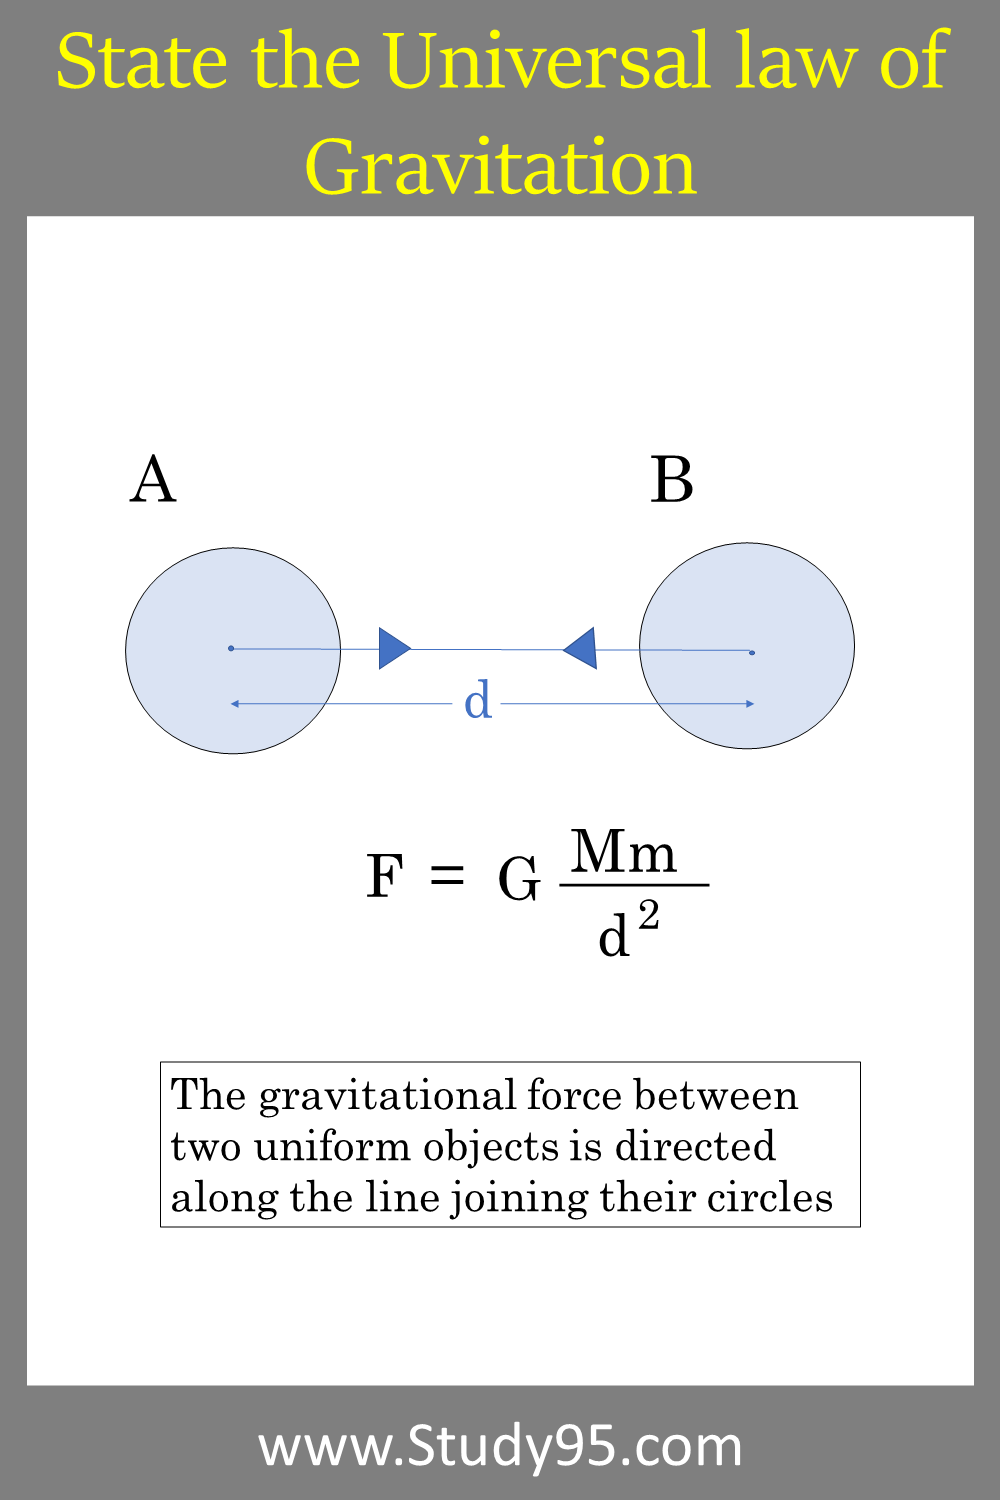 What is the Universal law of Gravitation